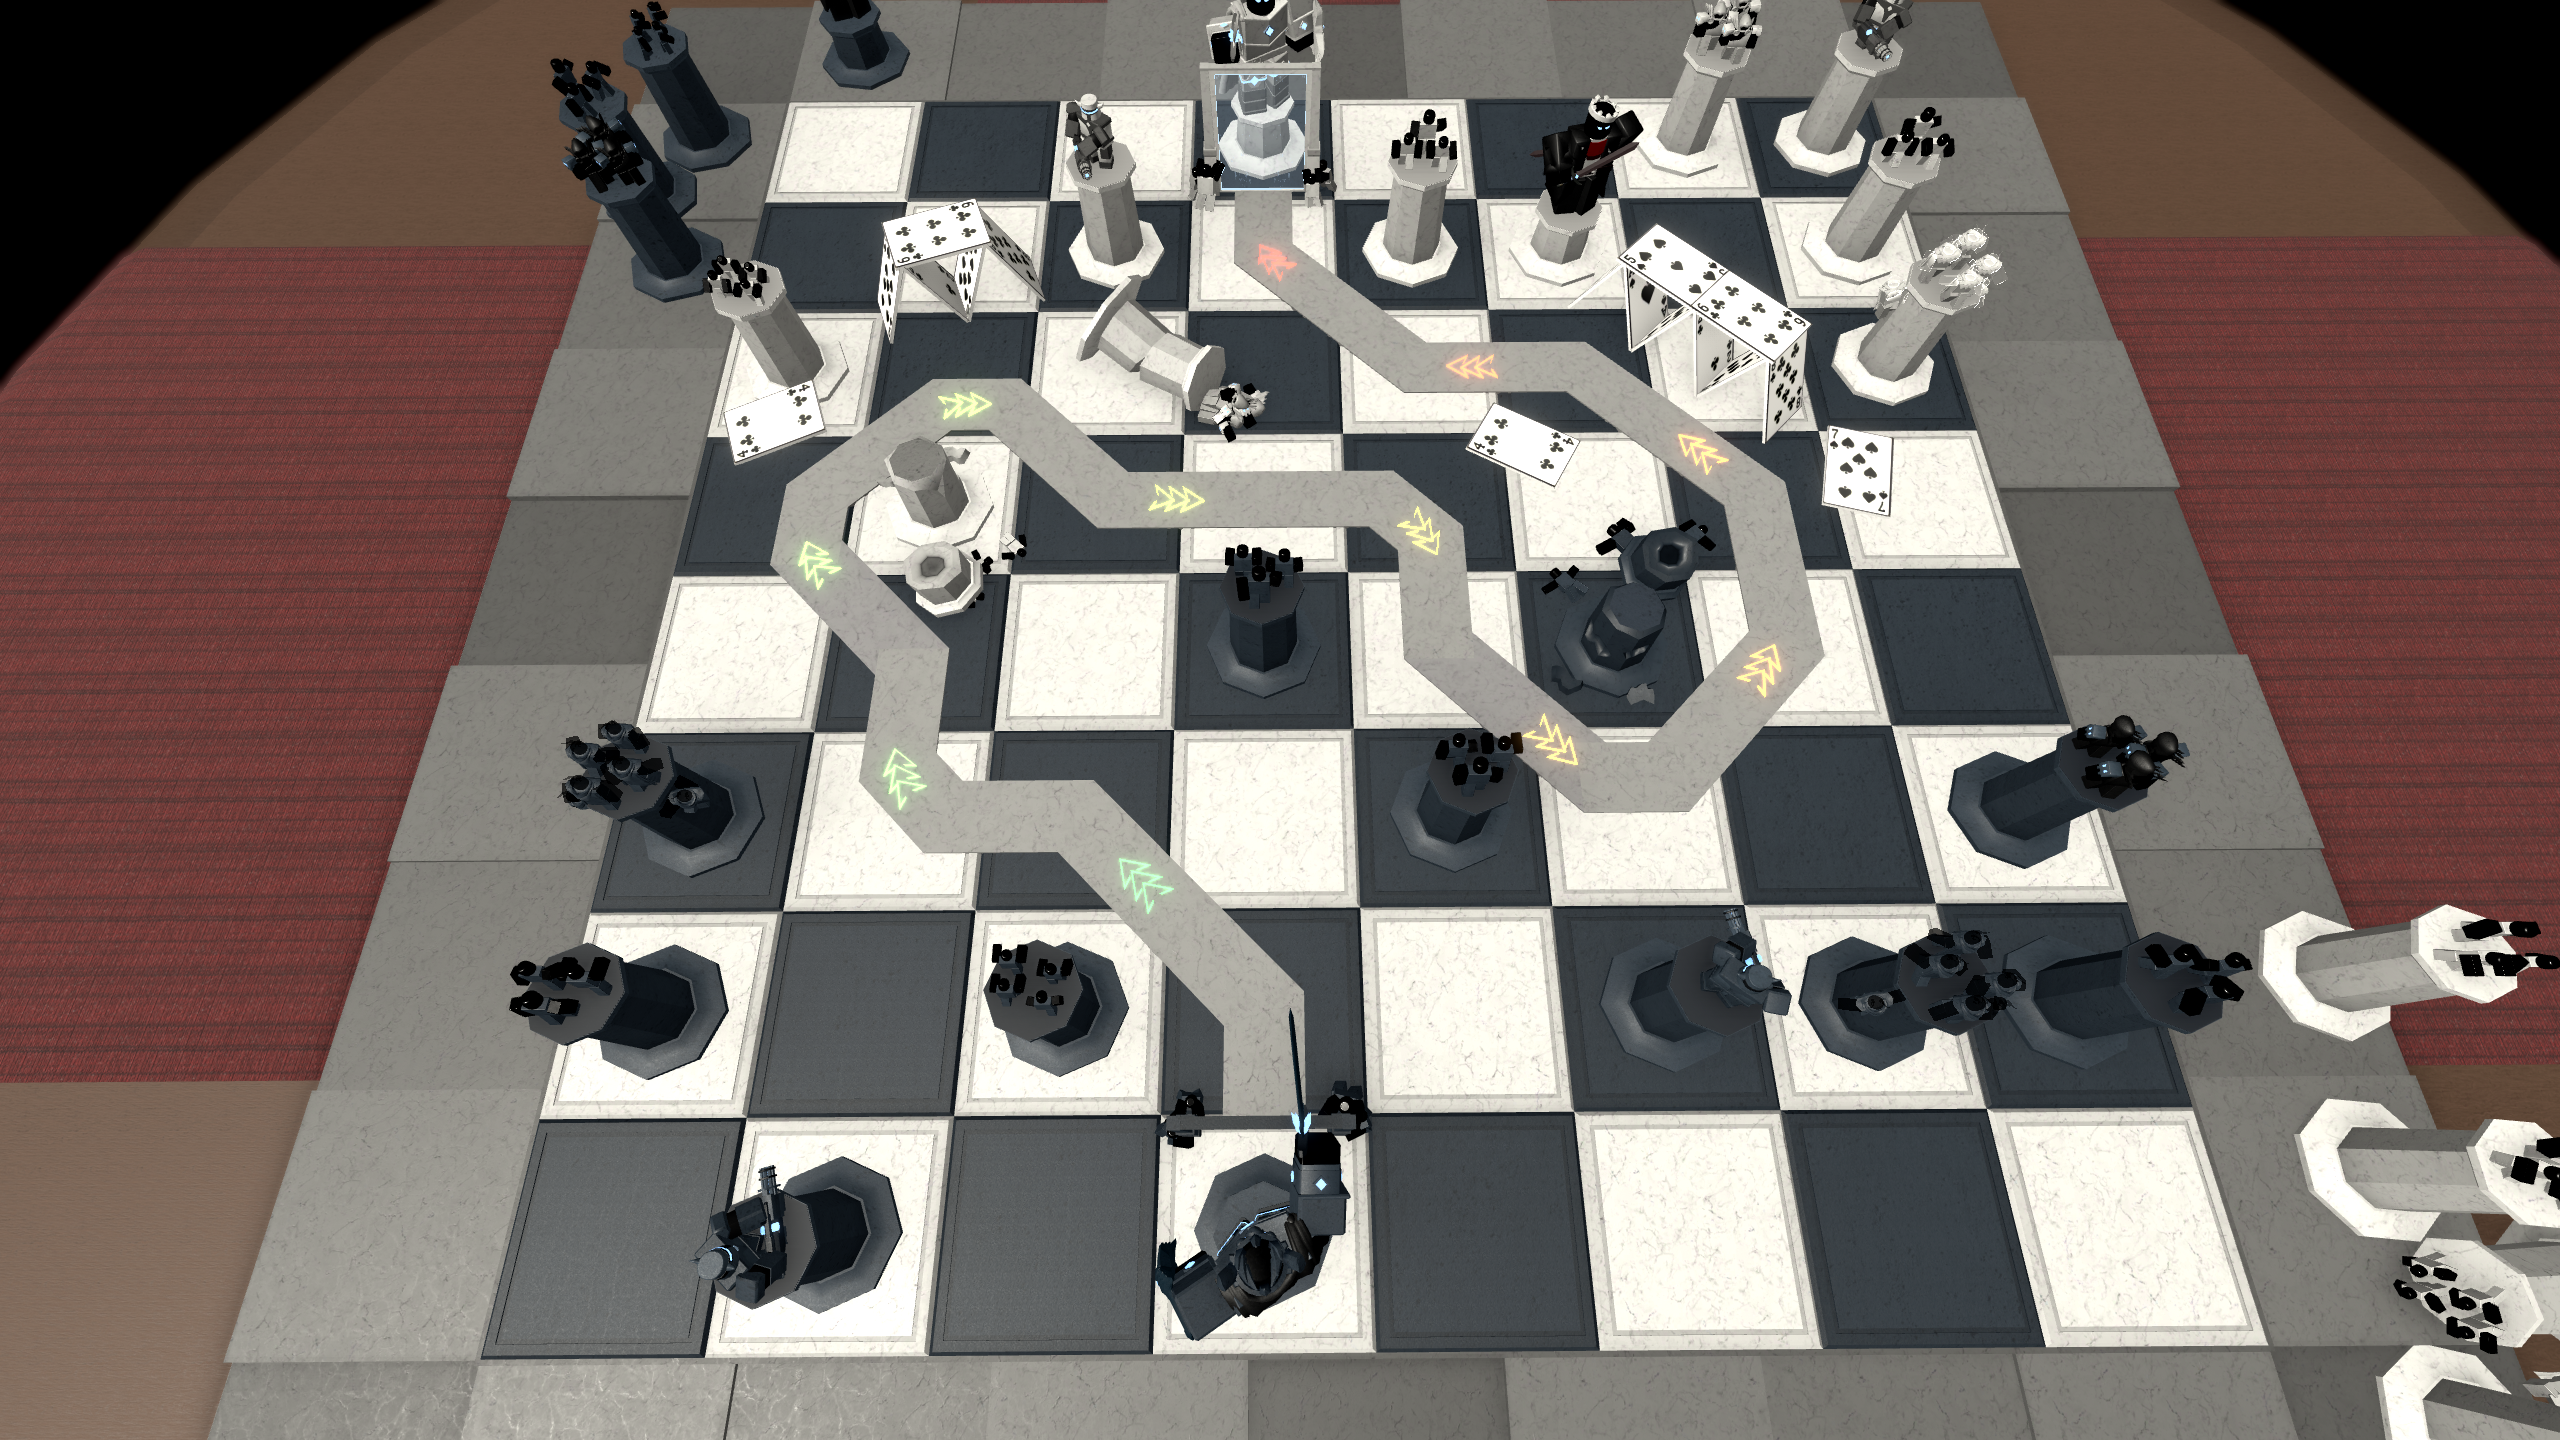 Chess Development : Bits 'n' Pieces - Chess Game Strategies